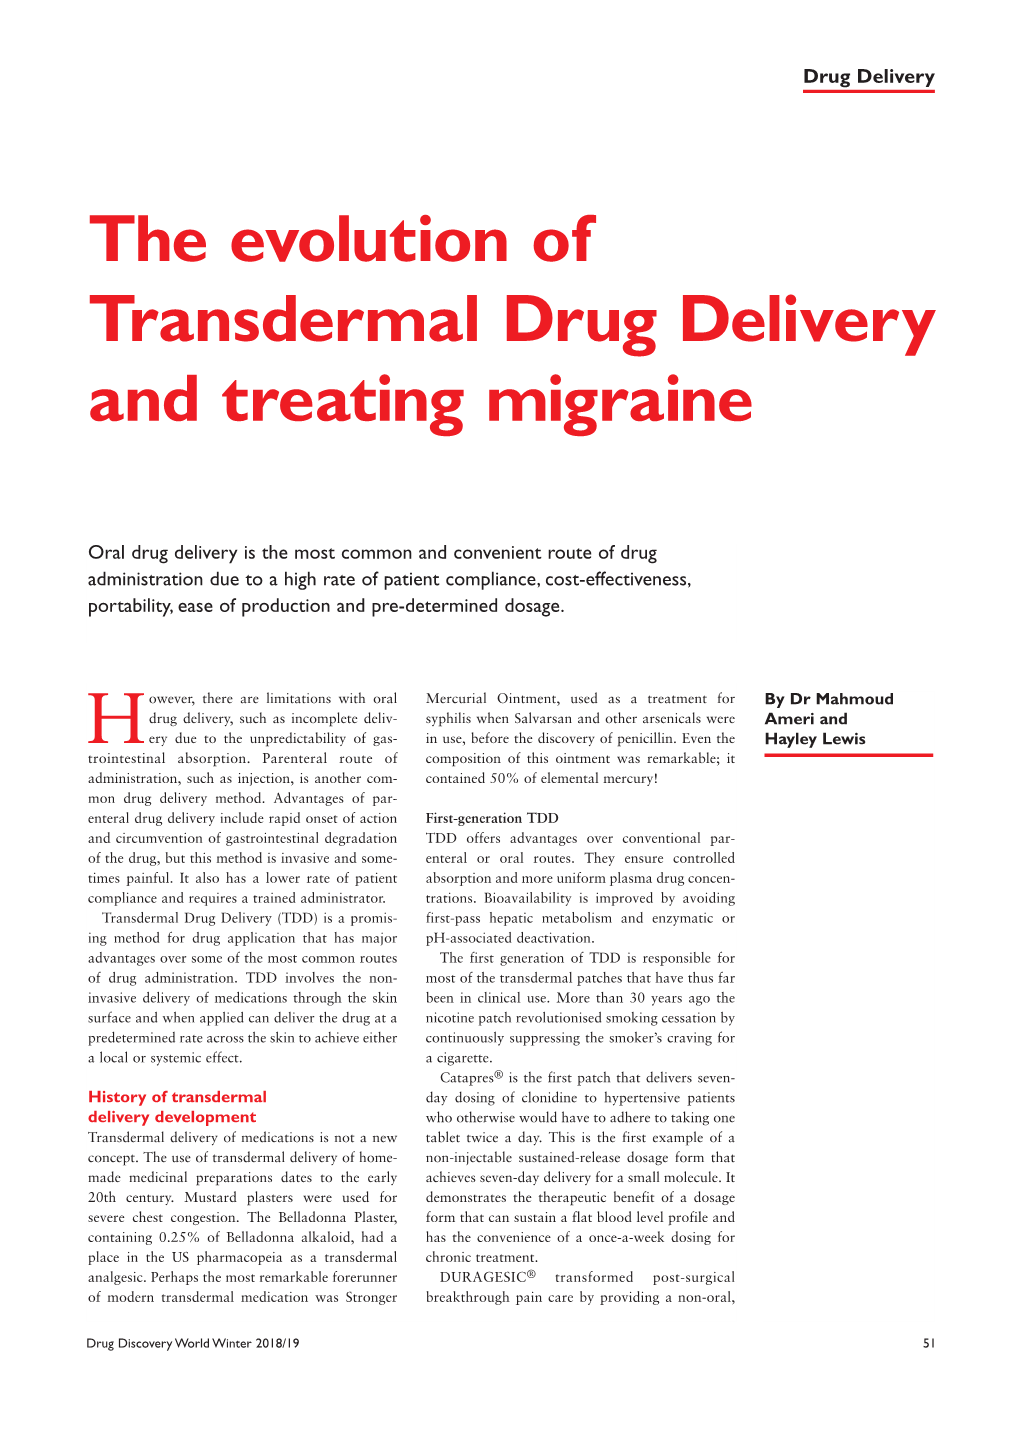 The Evolution of Transdermal Drug Delivery and Treating Migraine